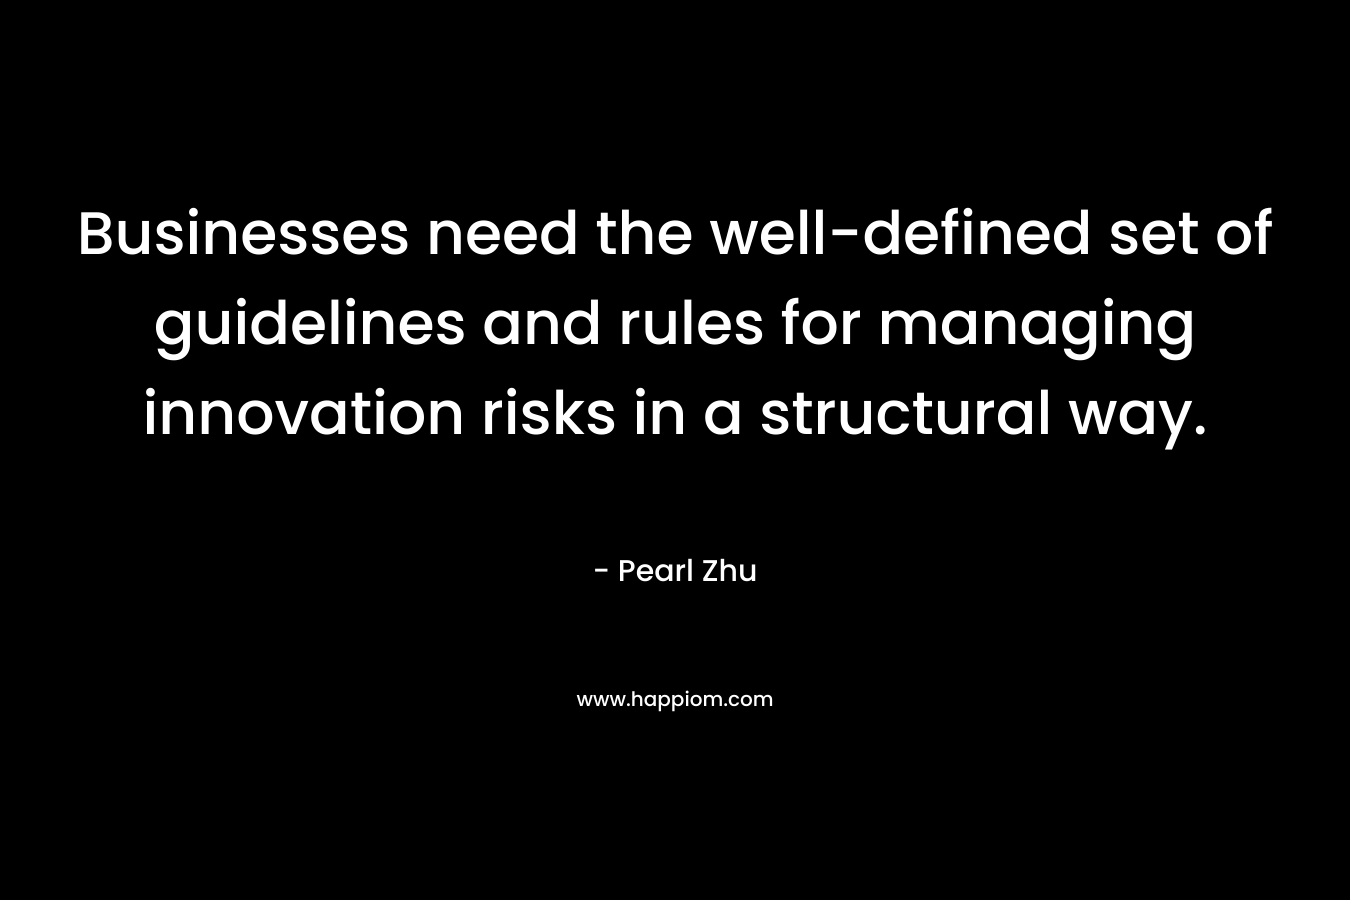 Businesses need the well-defined set of guidelines and rules for managing innovation risks in a structural way.